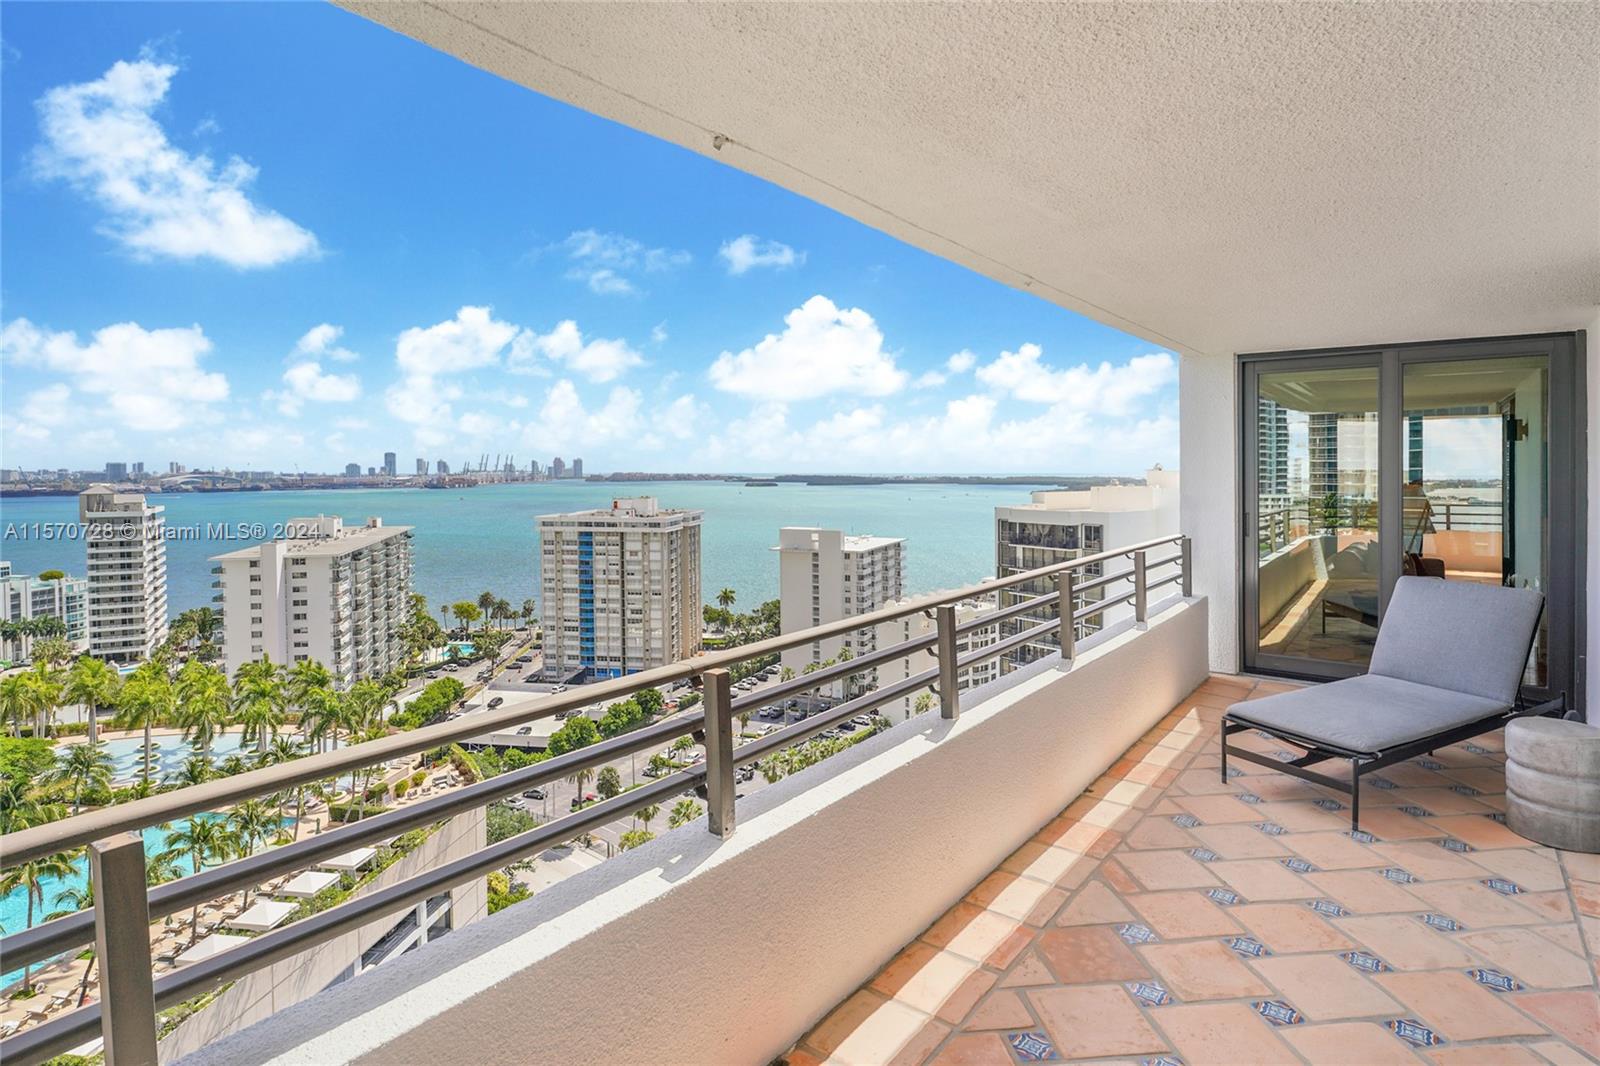 Breathtaking views of Biscayne Bay, Miami Beach, Fisher Island, and Key Biscayne await you at this elegant 22nd-floor unit at Brickell East, an exclusive boutique building where privacy and luxury are assured. Impeccably designed by owner with an architectural background, every corner of this spacious 2BR/2BA residence has been thoughtfully updated for comfort and style. This east-facing unit boasts a host of premium features, including two large balconies with endless water views, impact sliders, Lutron-controlled lighting/automated window treatments, custom built-ins by California Closets, and exceptional storage. Brickell East offers a wealth of amenities, including an inviting pool, gym, and 24/7 concierge. Enjoy a coveted location near fine dining, shopping, entertainment, and parks.